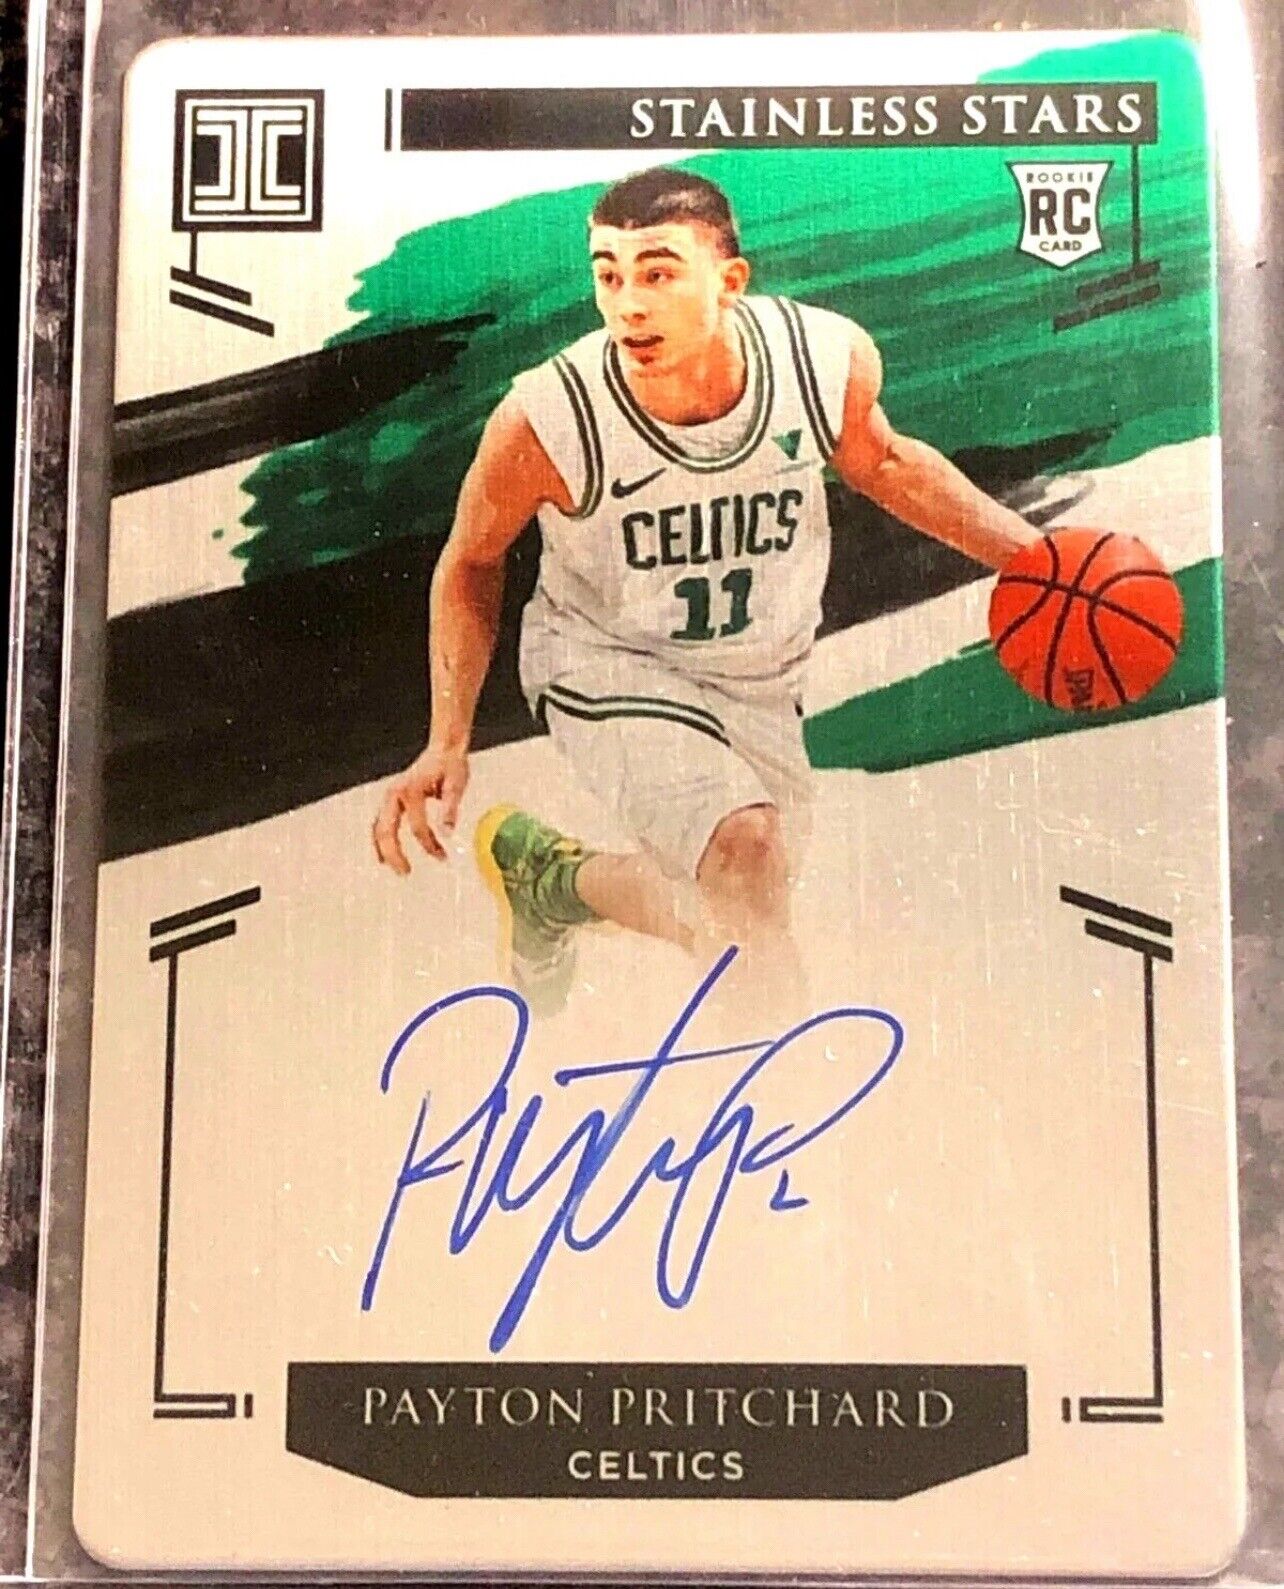 2020 Panini Impeccable - Payton Pritchard RC - ON CARD AUTOGRAPH - STAINLESS /99